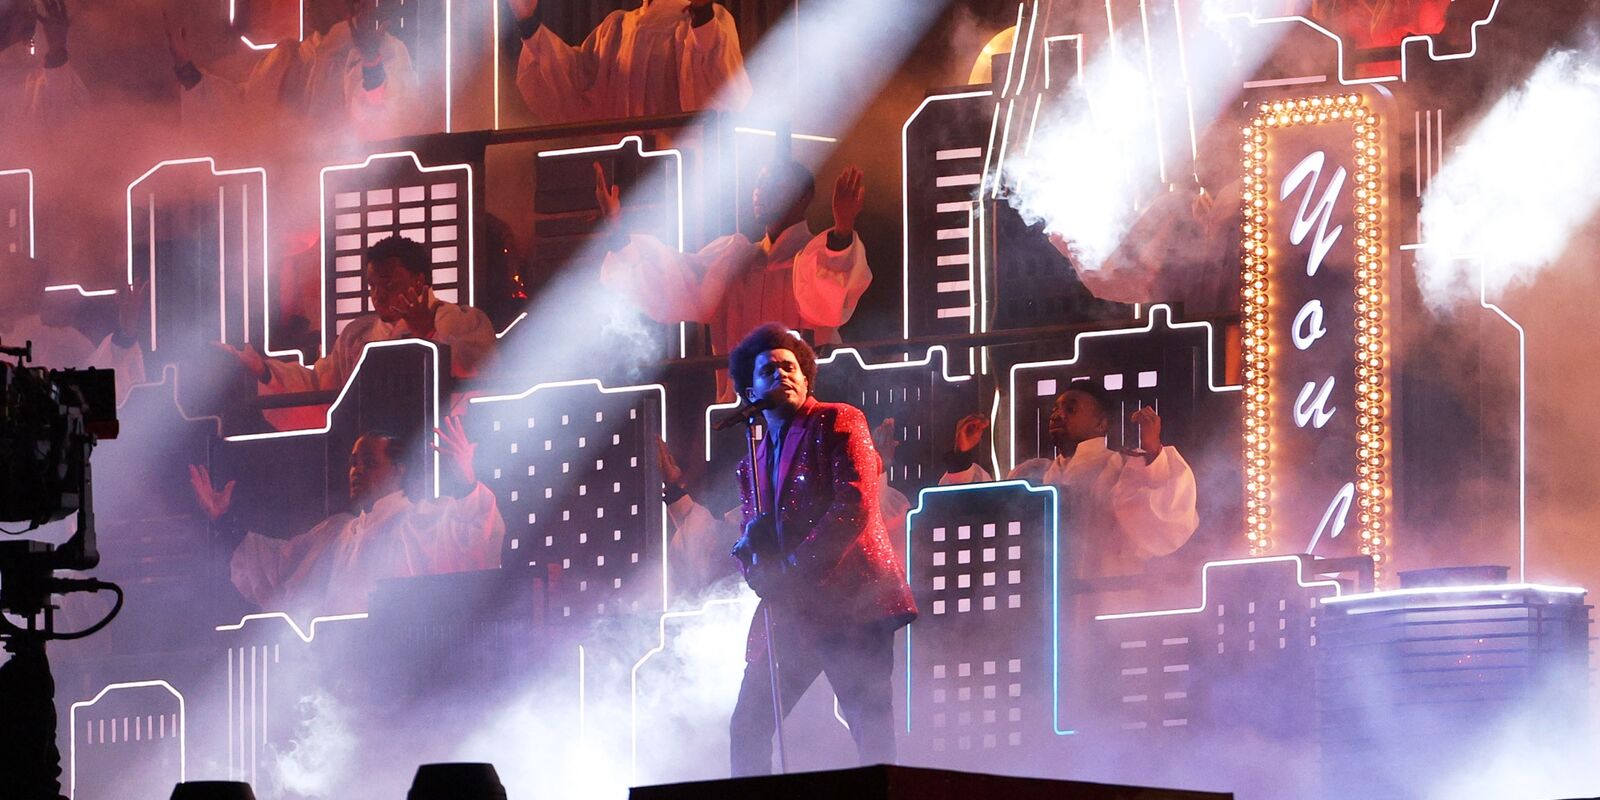 The Weeknd performs during the Super Bowl Halftime Show in Tampa, Florida, on Feb. 7, 2021.